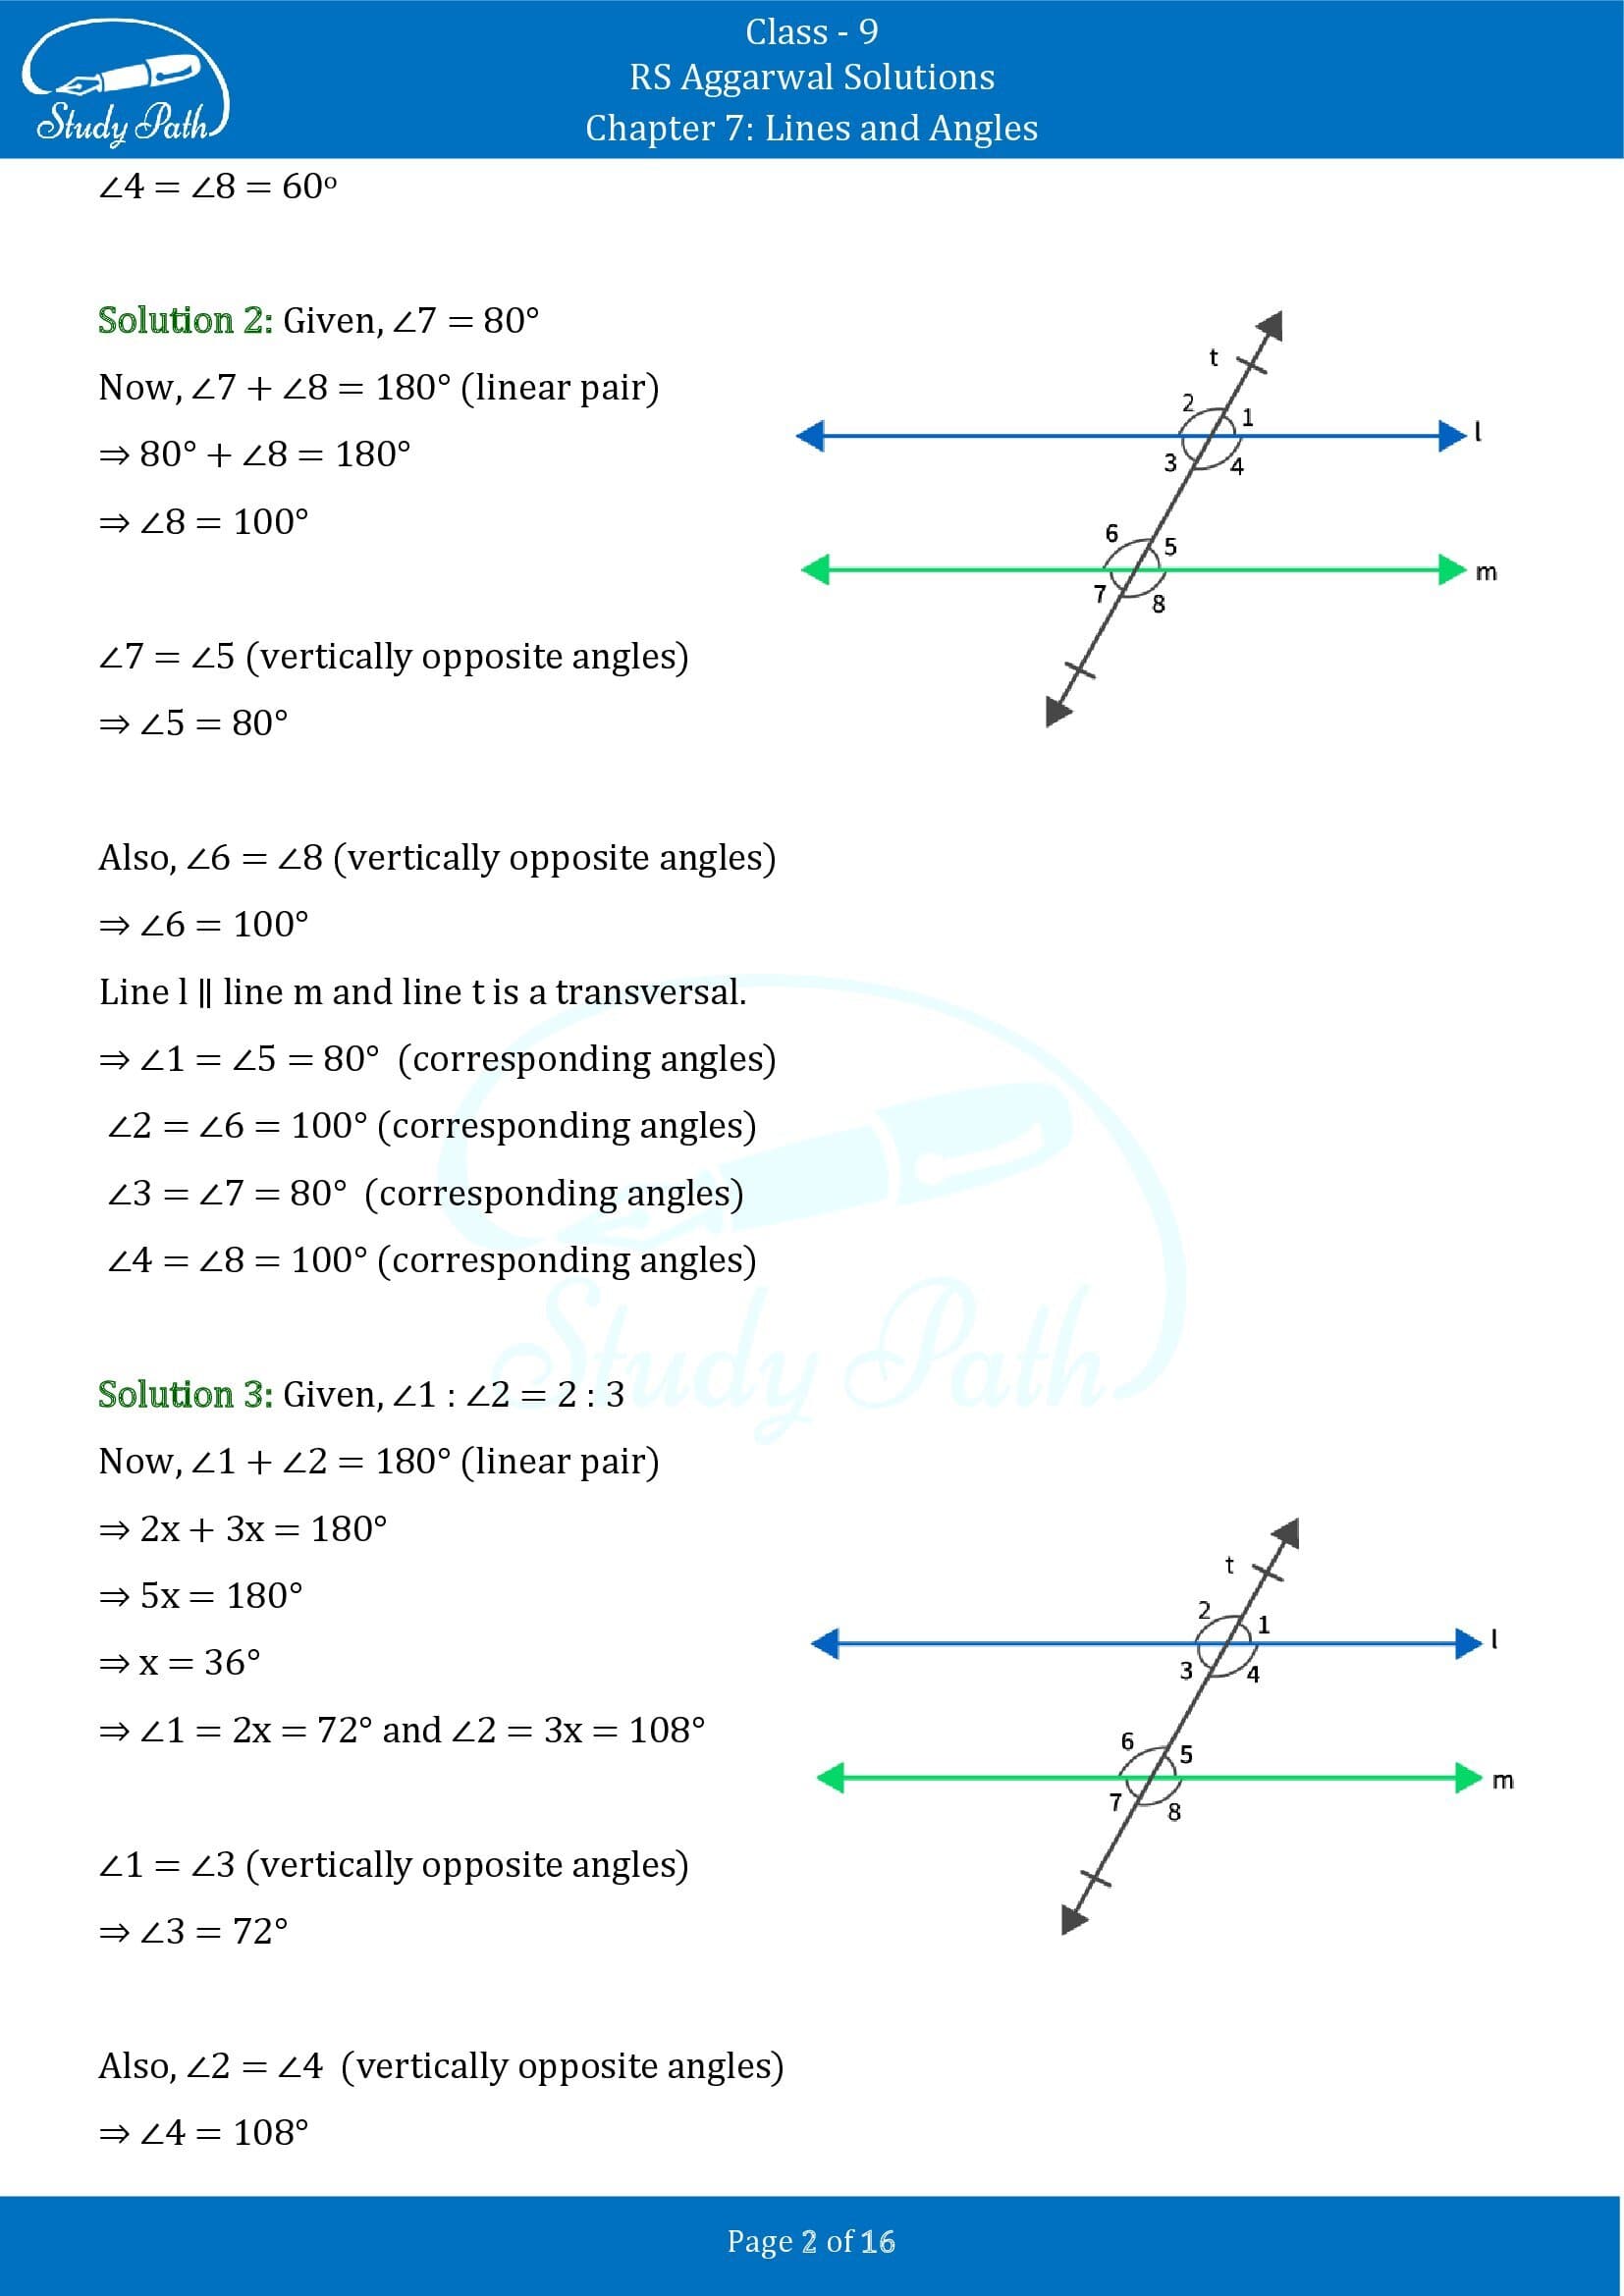 RS Aggarwal Solutions Class 9 Chapter 7 Lines and Angles Exercise 7C 00002